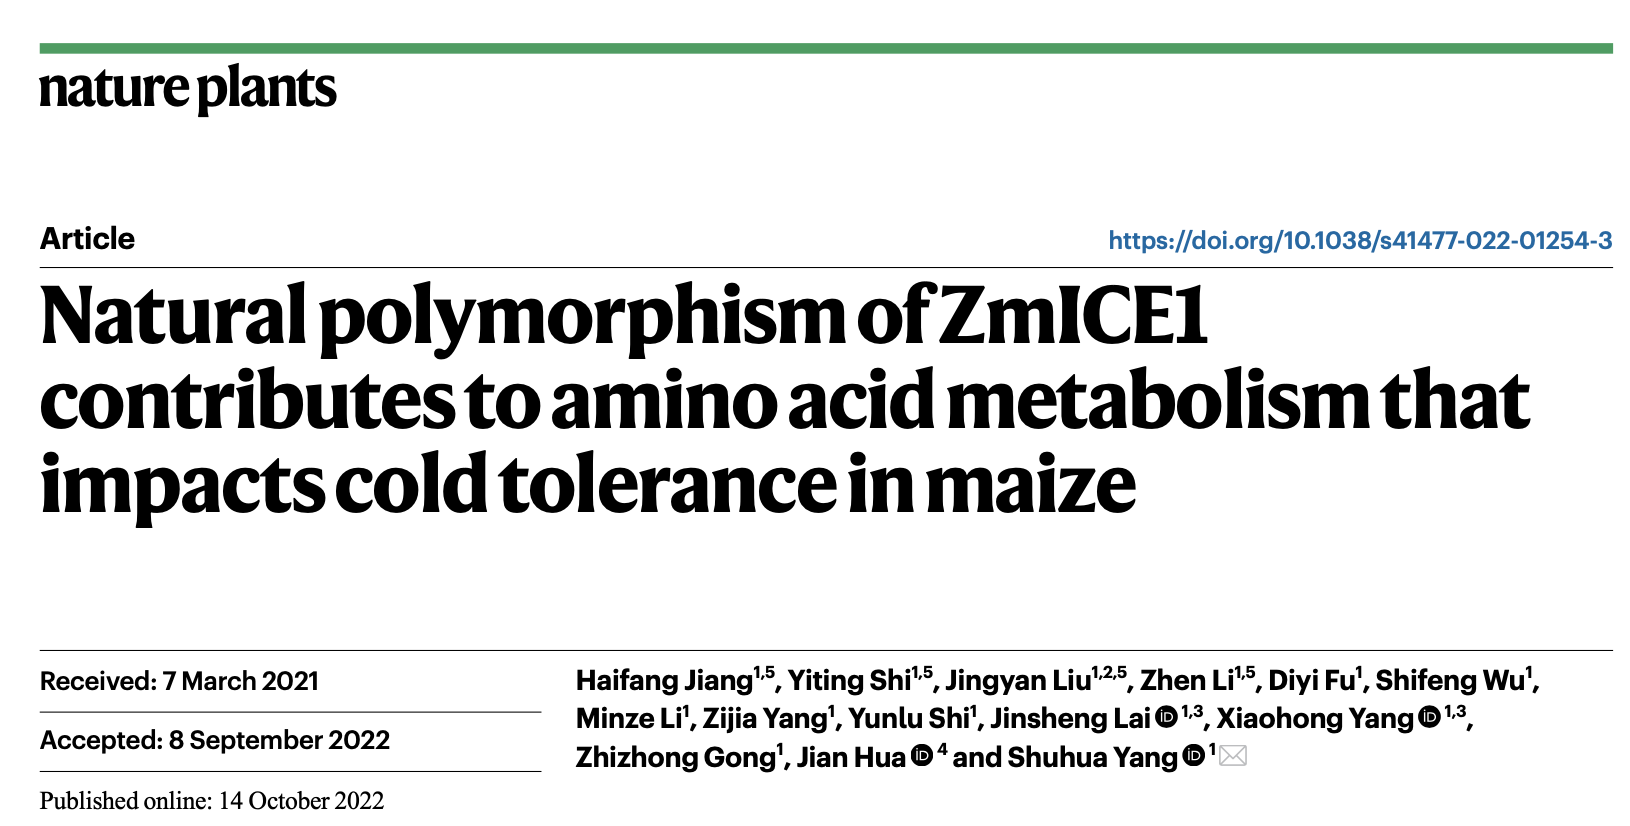 Natural polymorphism of ZmICE1 contributes to amino acid metabolism that impacts cold tolerance in maize